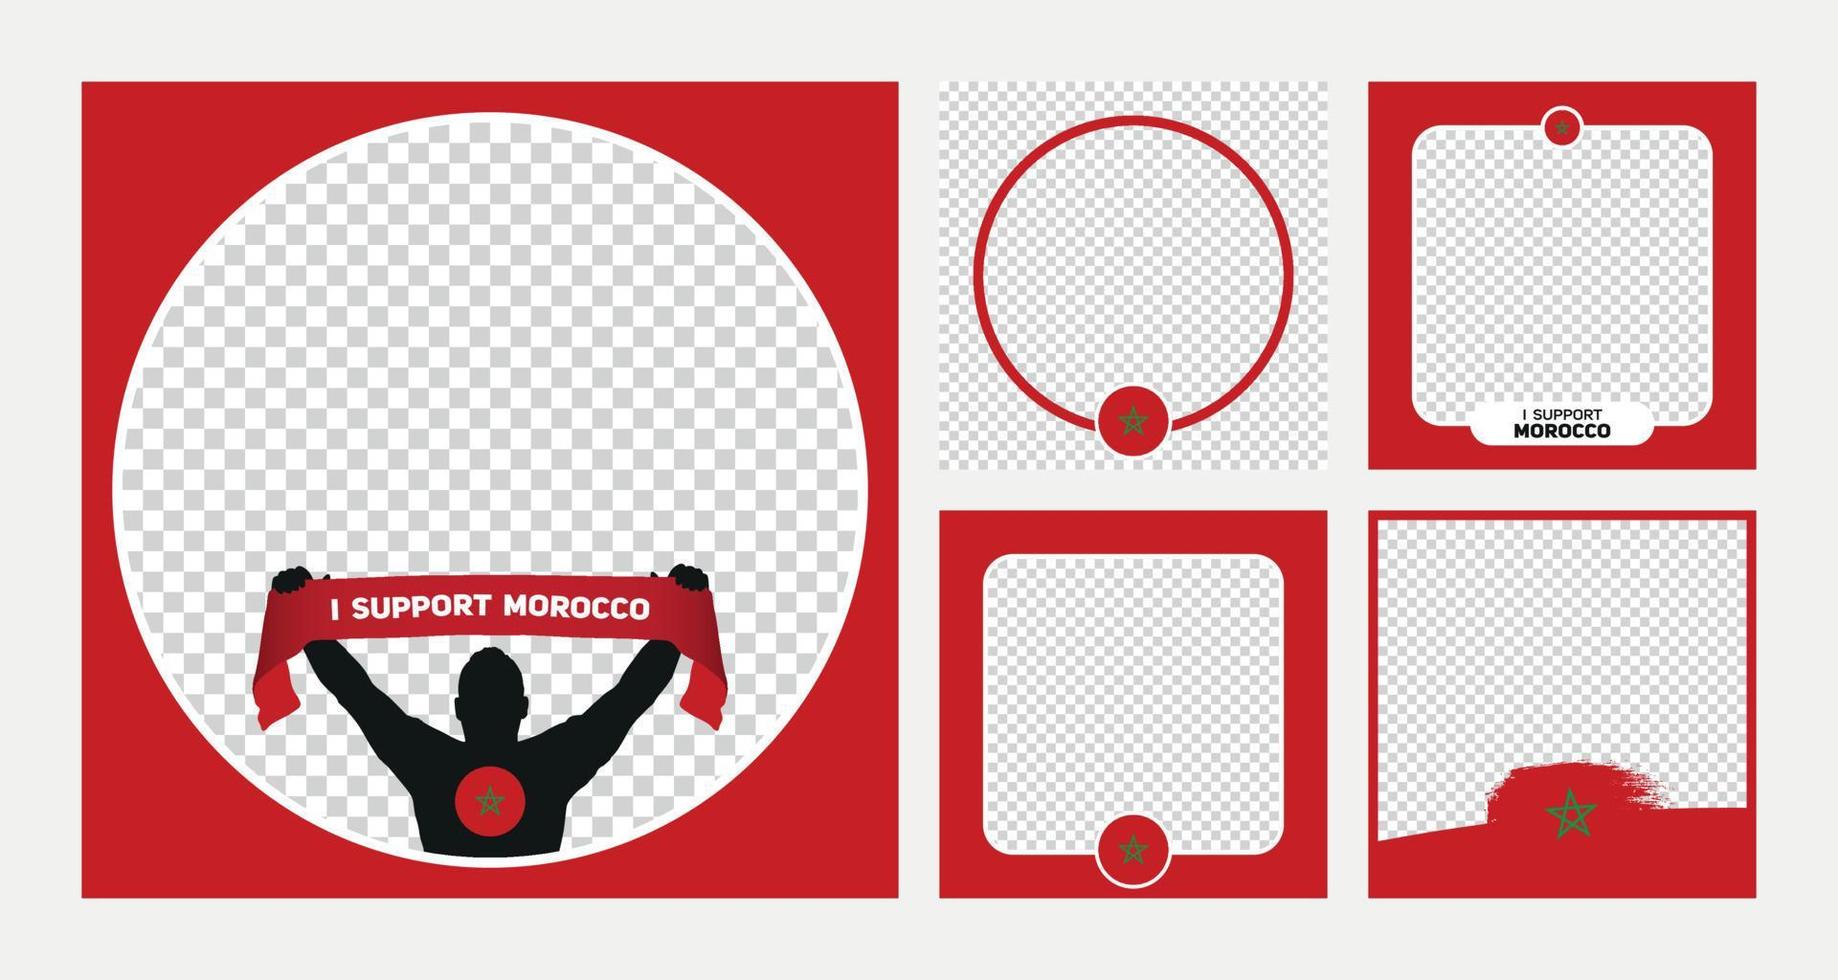 I support Morocco world football championship profil picture frame banners for social media vector